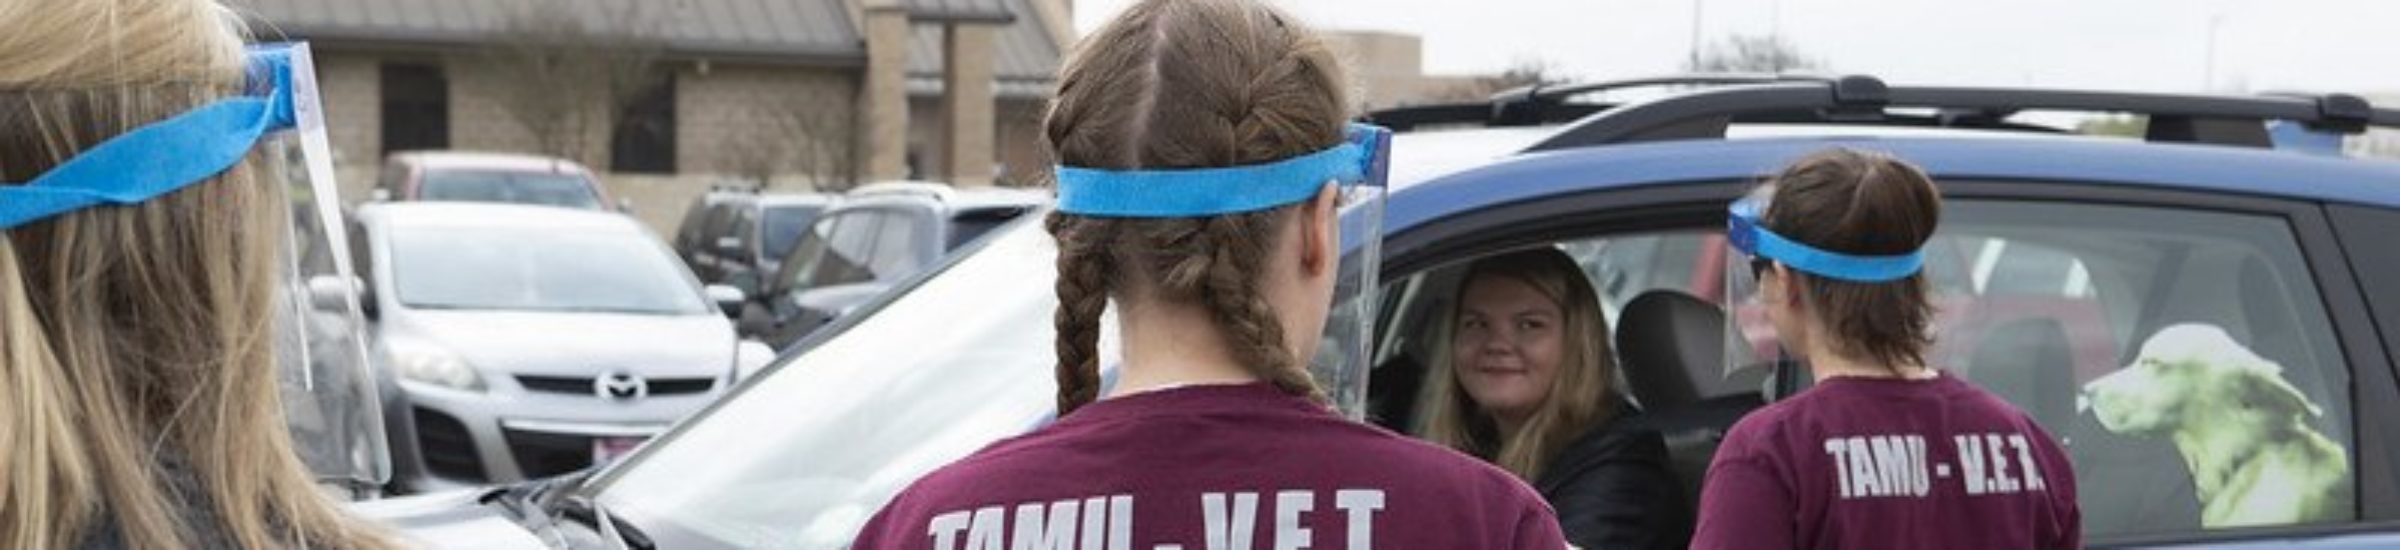 people wearing maroon vetmed shirts wearing protective masks talk to a woman in a car